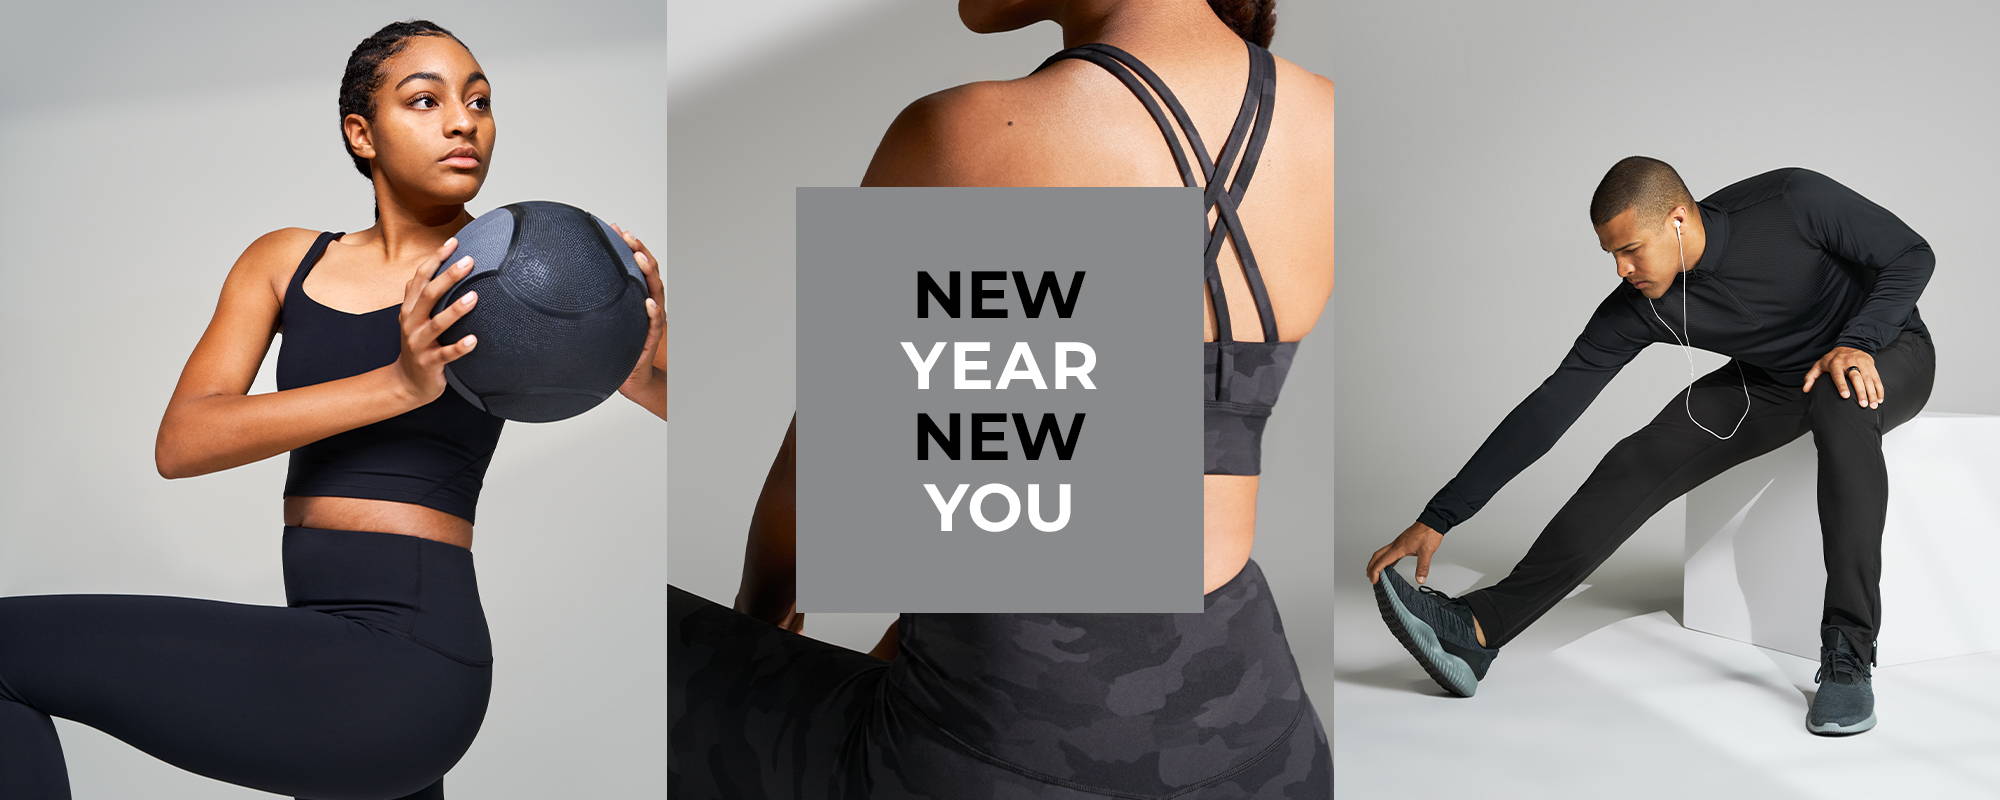 New Year New You. Tall woman and man wearing clothing from American Tall's Balance and Performance collection. 